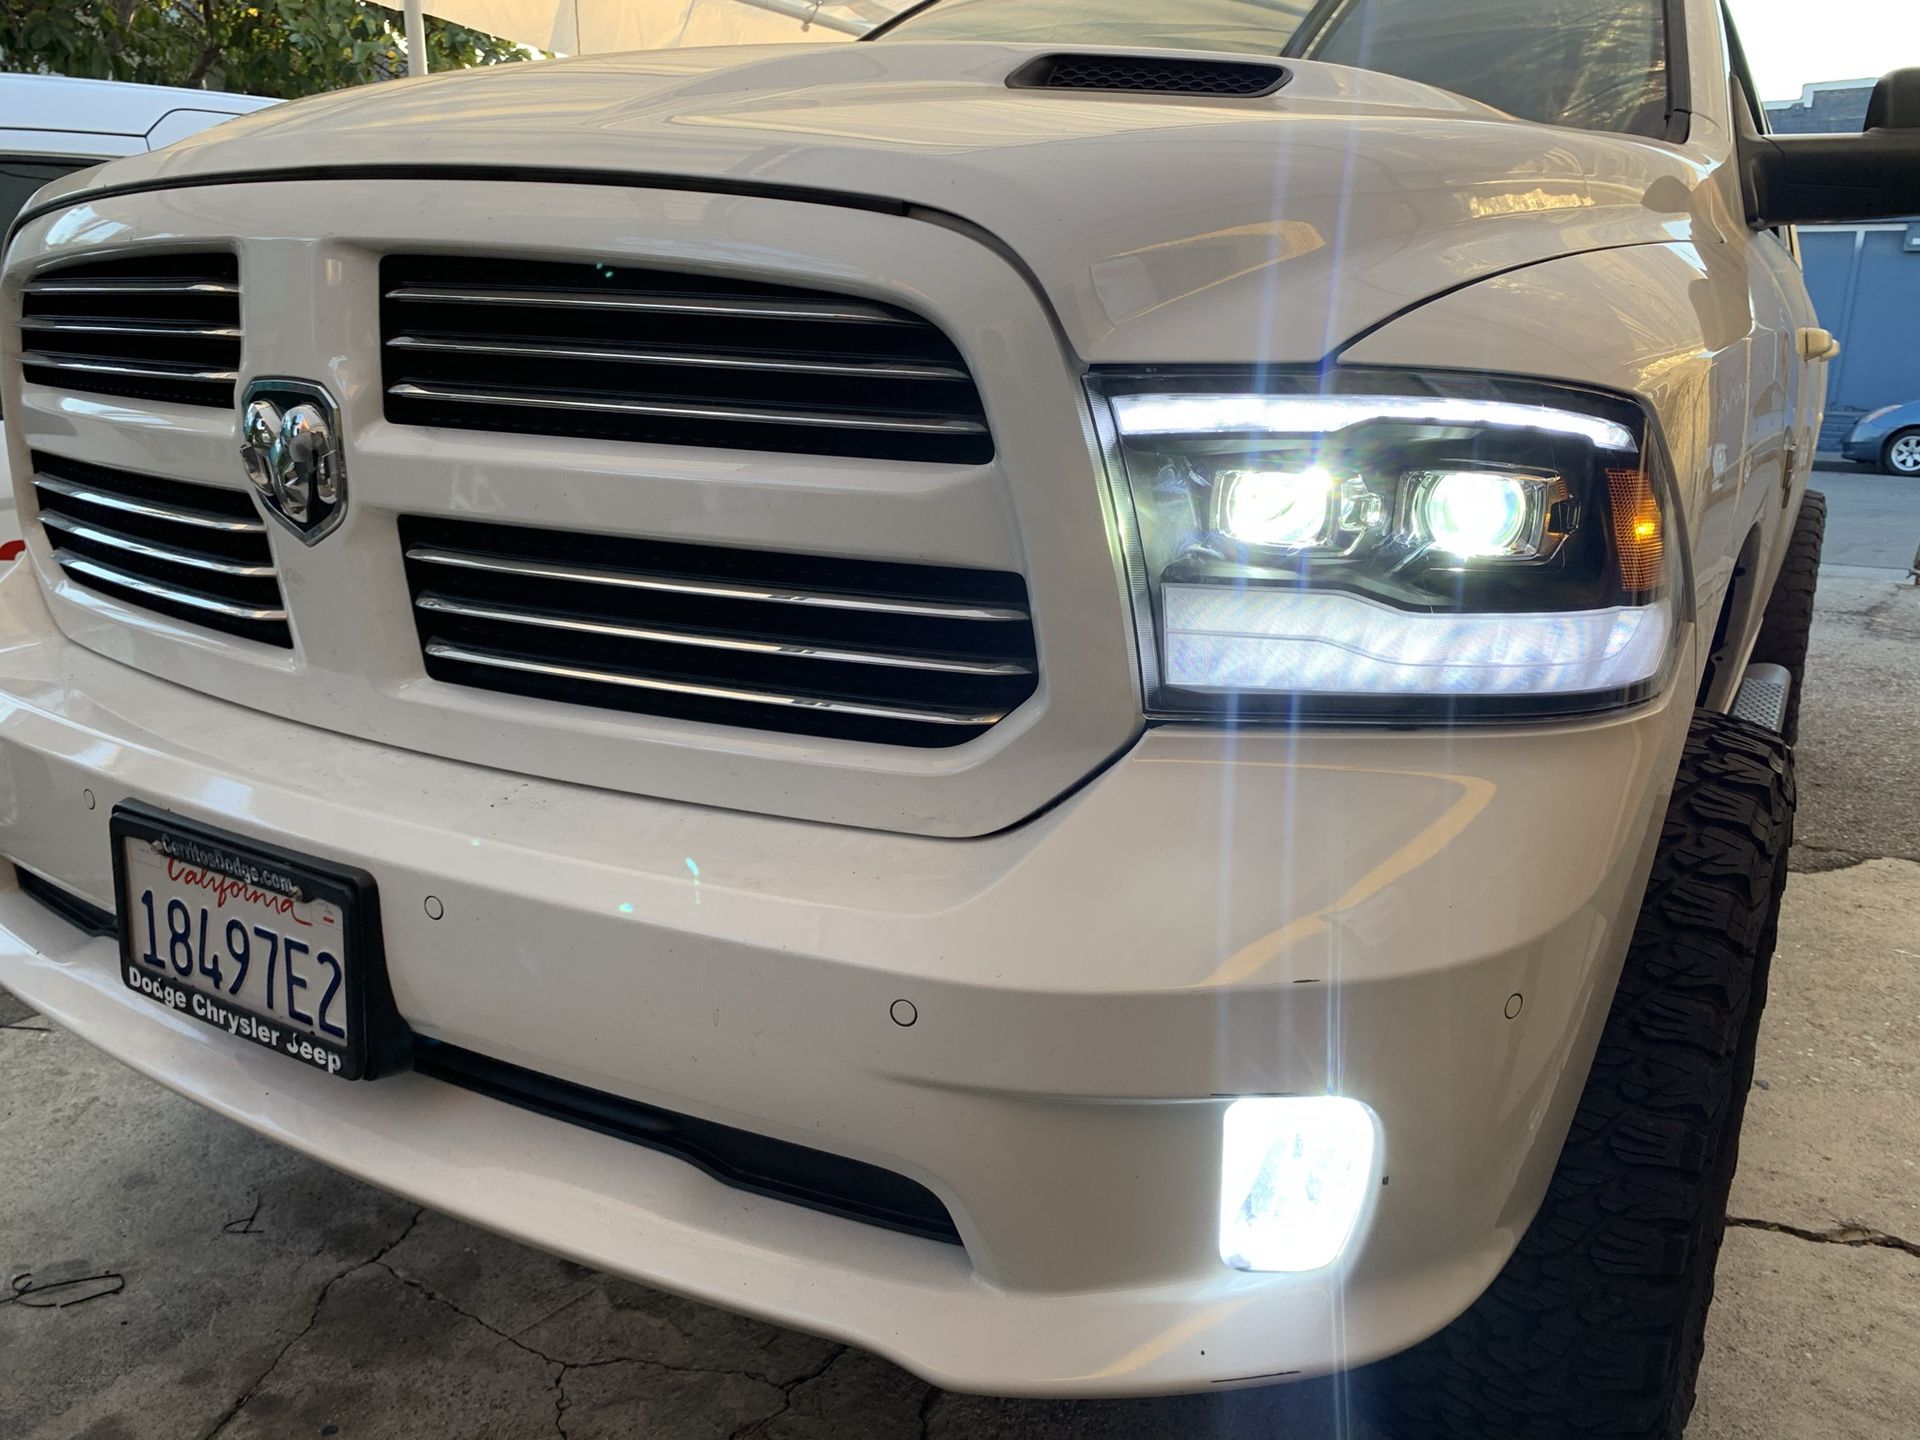 LED HEADLIGHTS DAYLEAD USA TOP QUALITY LOWEST price 25$ set free license plate leds with purchase store location